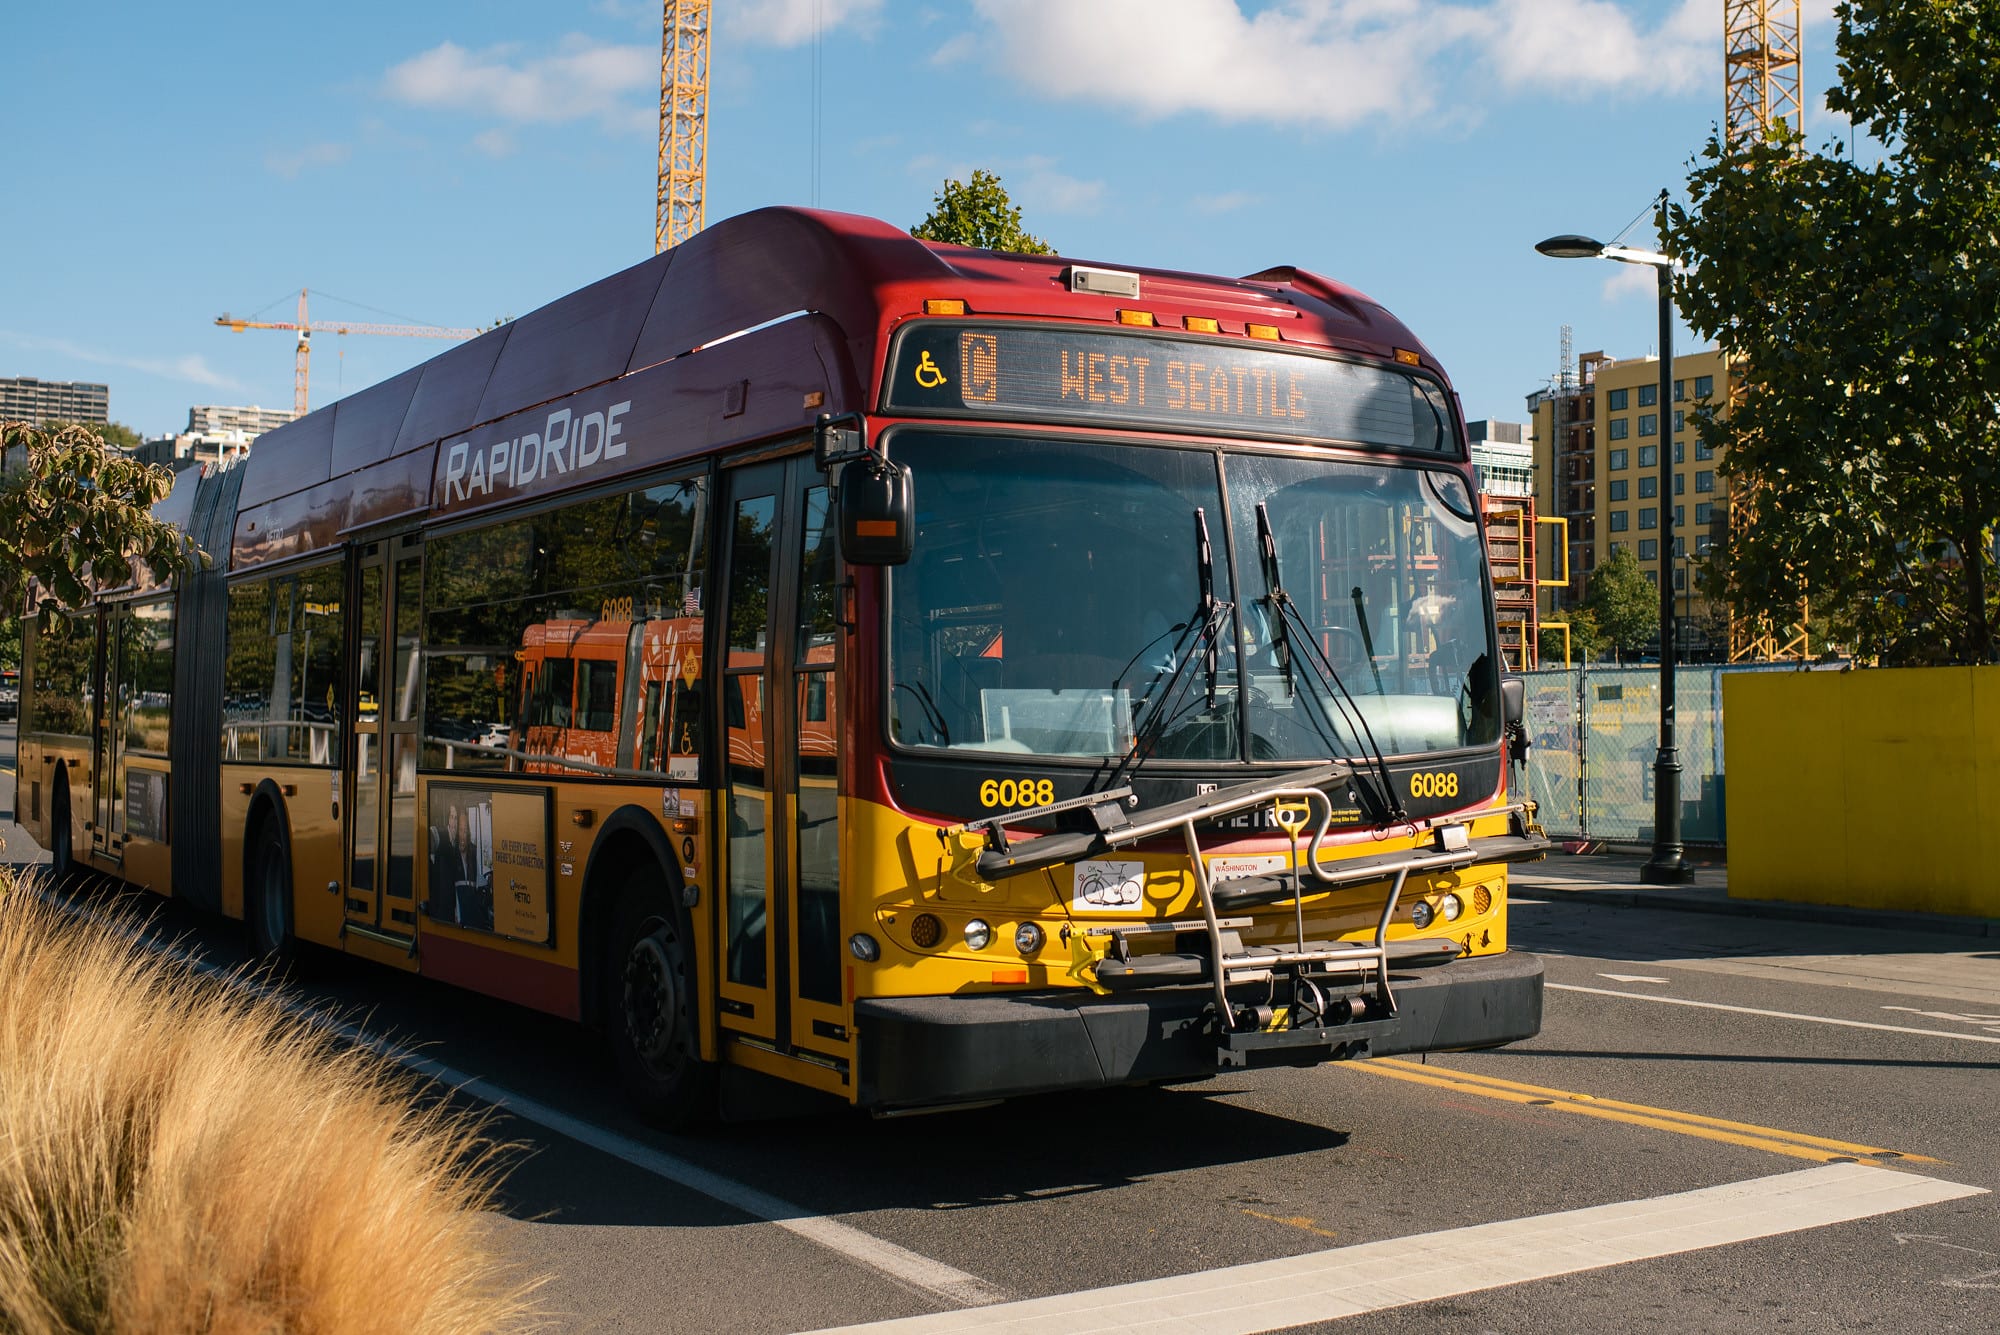 The RapidRide C Route in West Seattle.